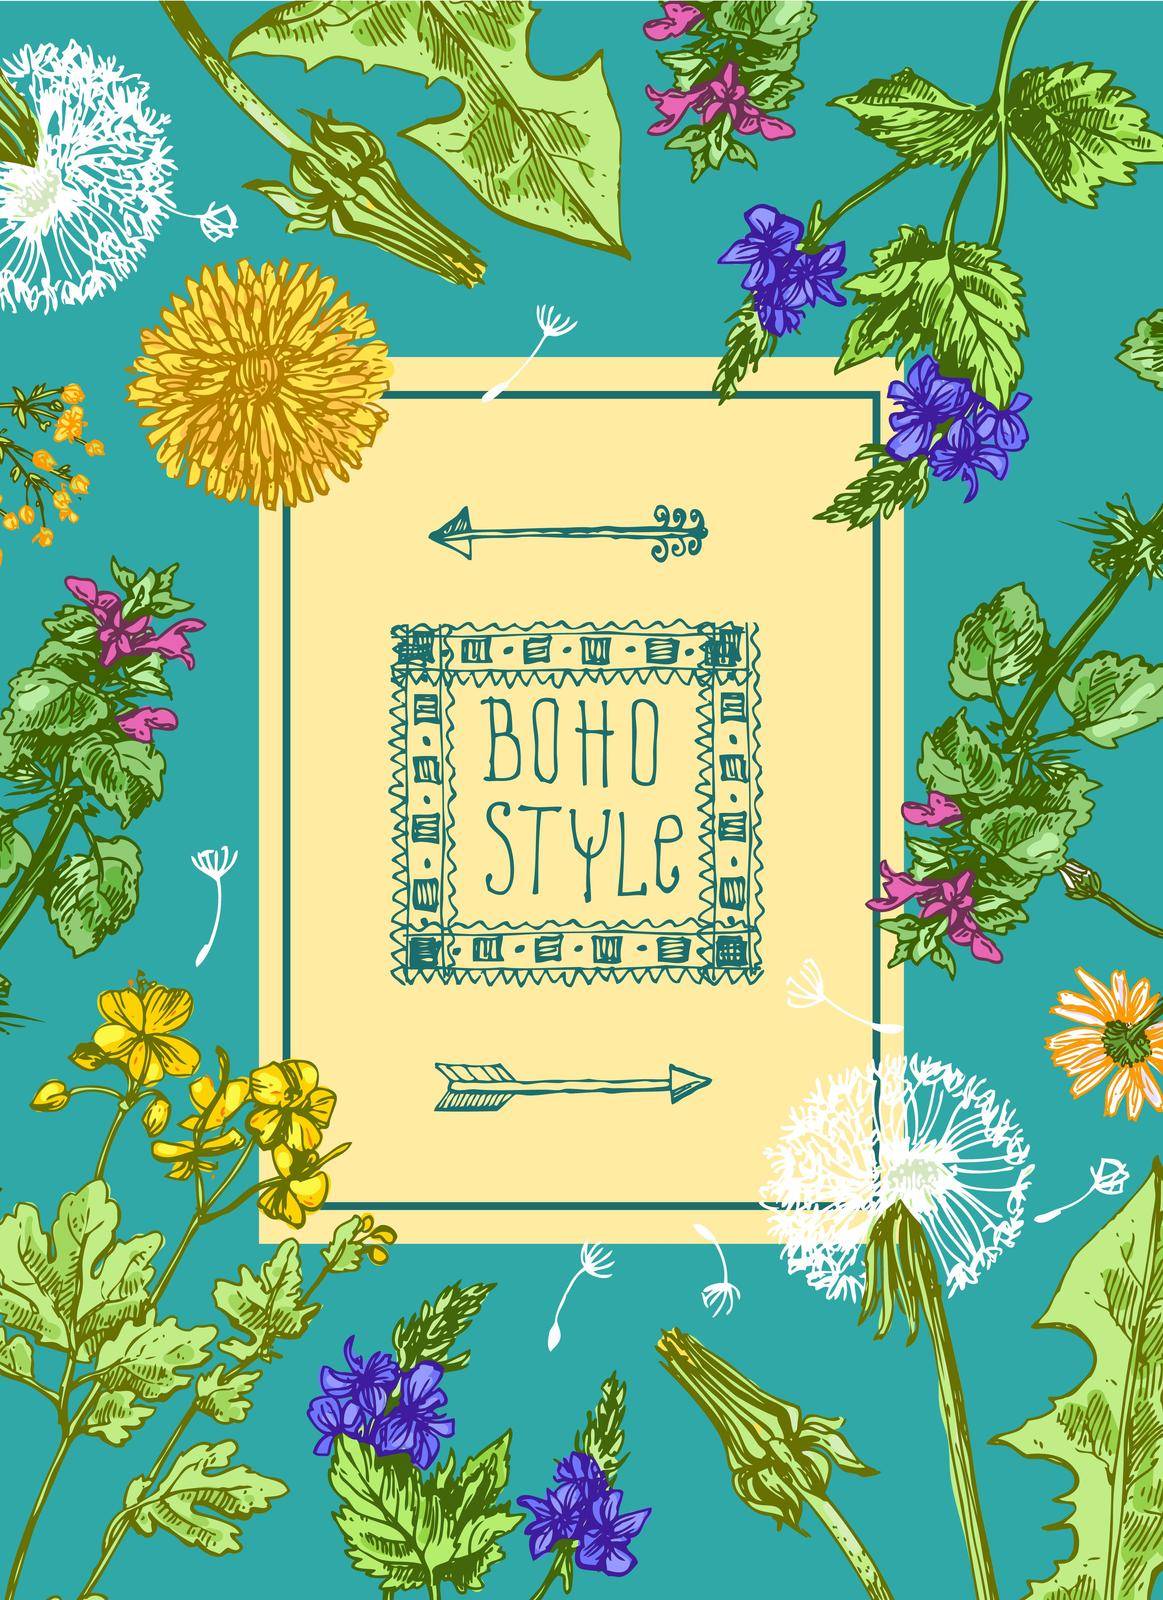 Hand drawn vector frame with wildflowers. Decorative floral illustration. Sketch style. Us for skrapbuking, tissue, textile, cloth, fabric, web material